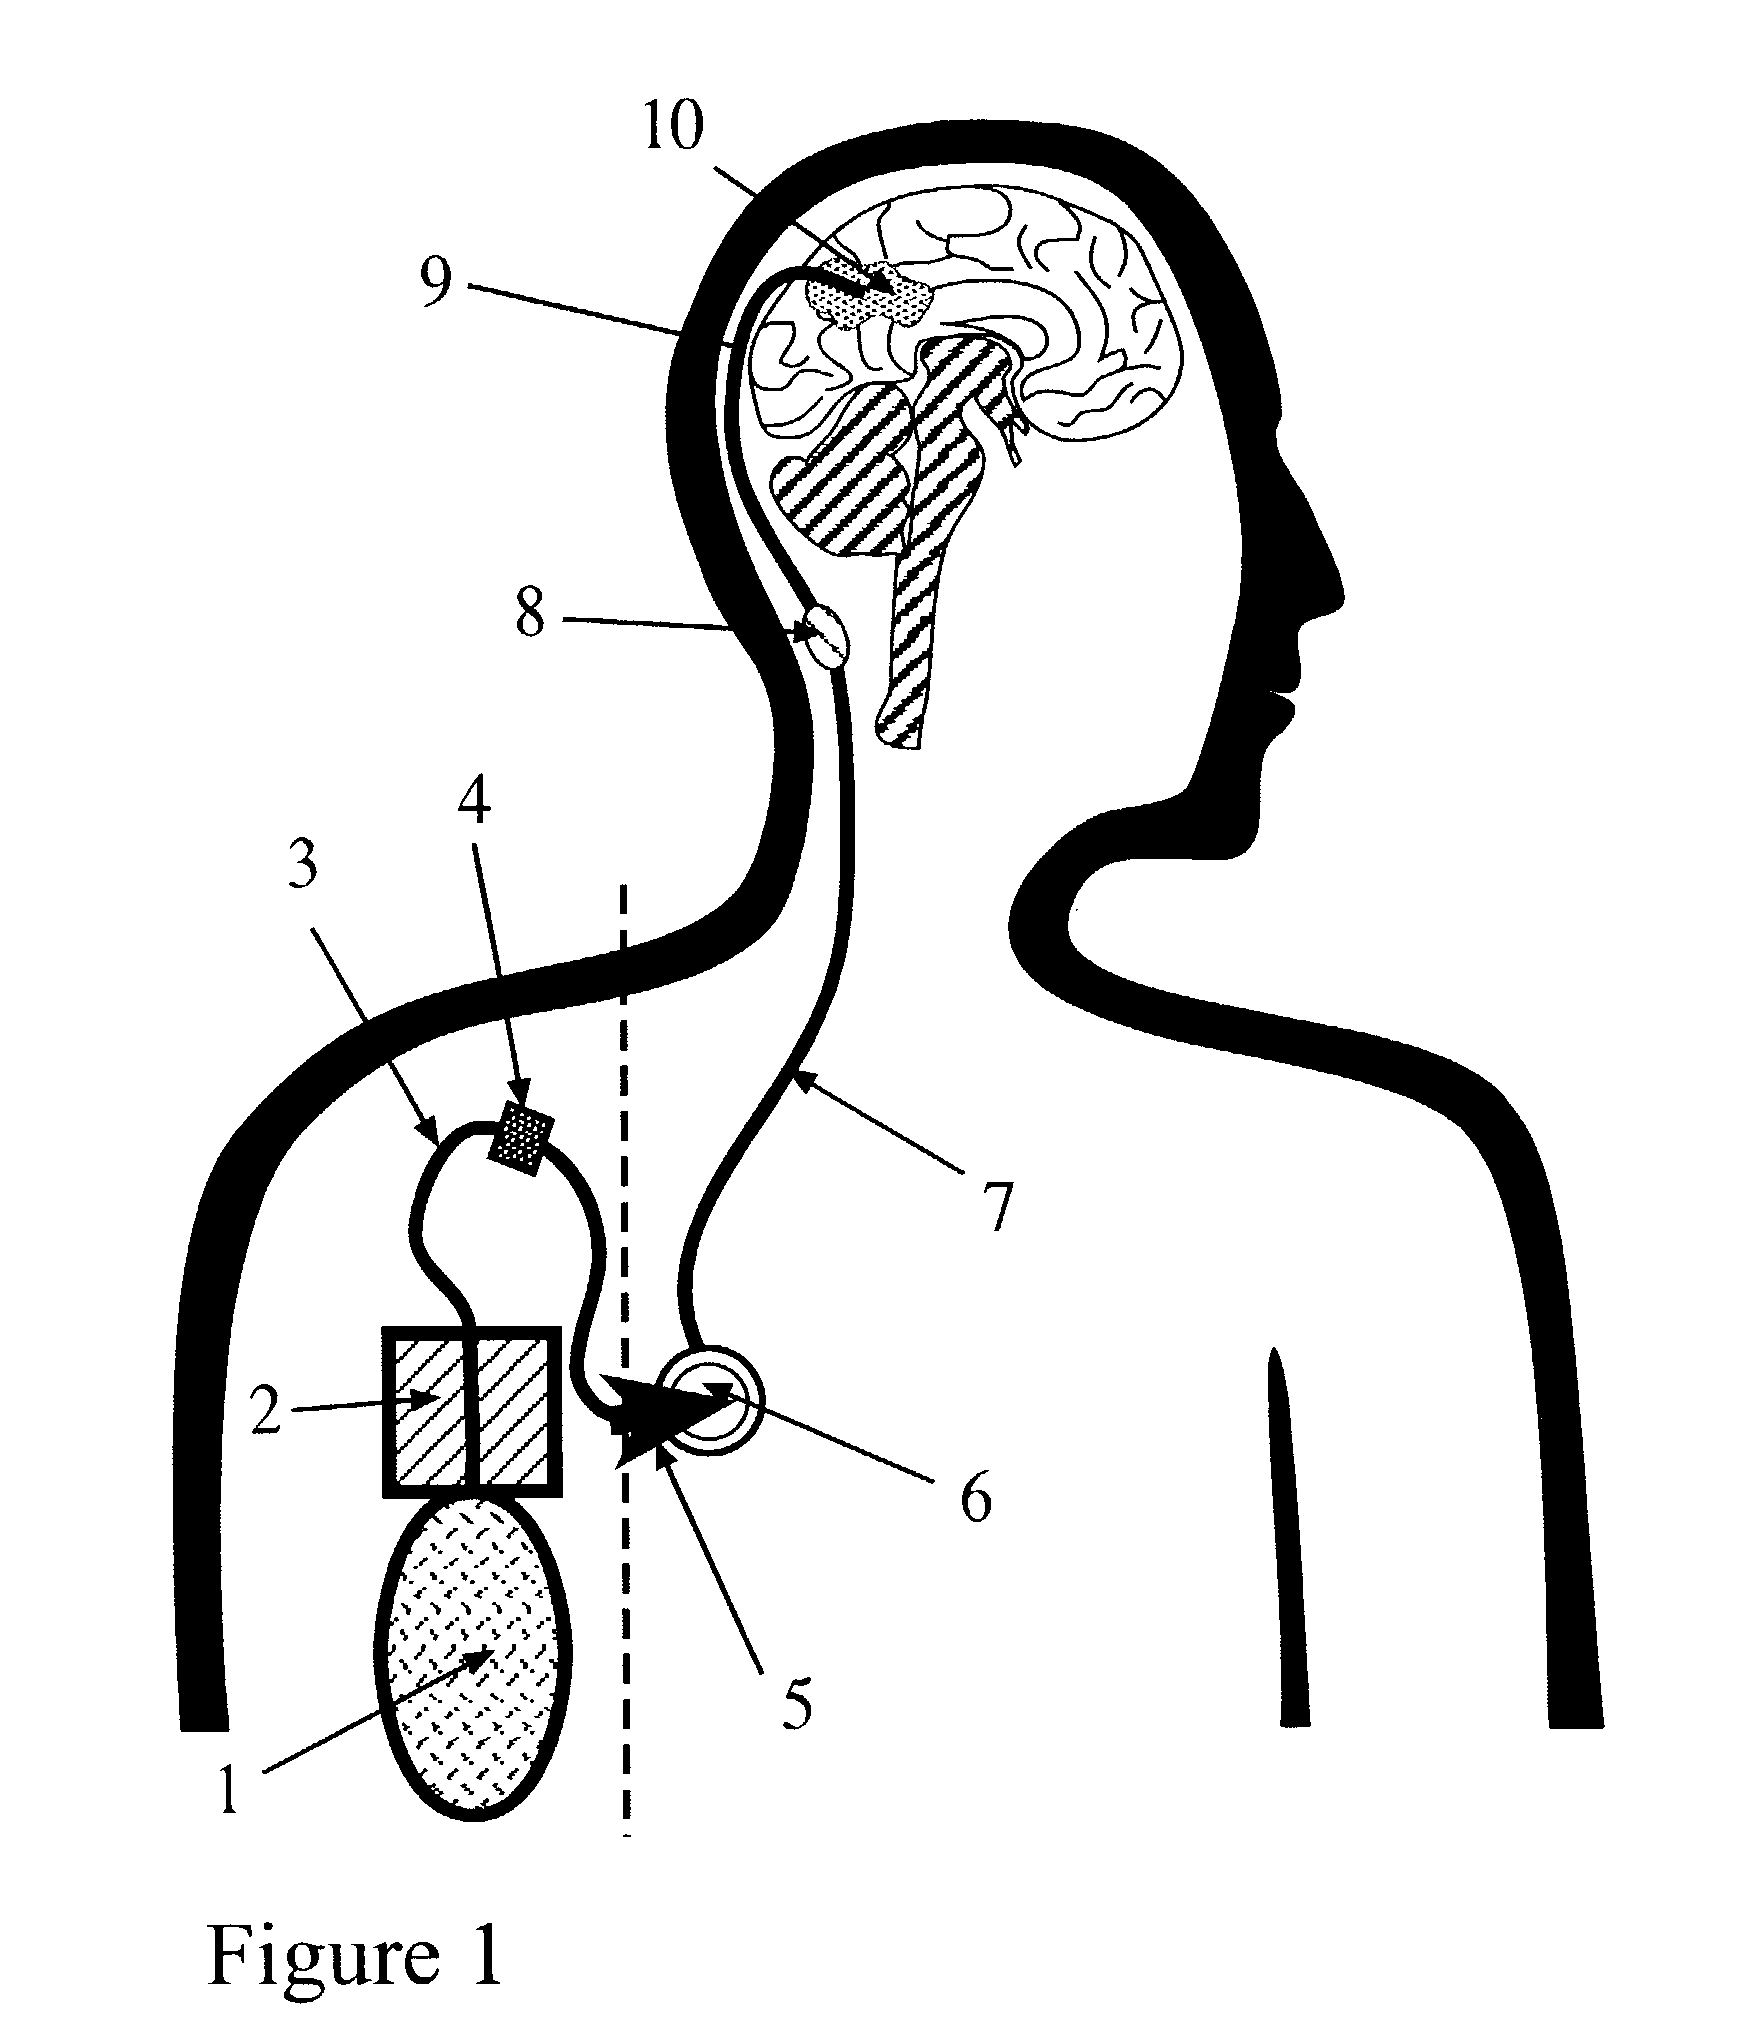 Portable equipment for administration of fluids into tissues and tumors by convection enhanced delivery technique